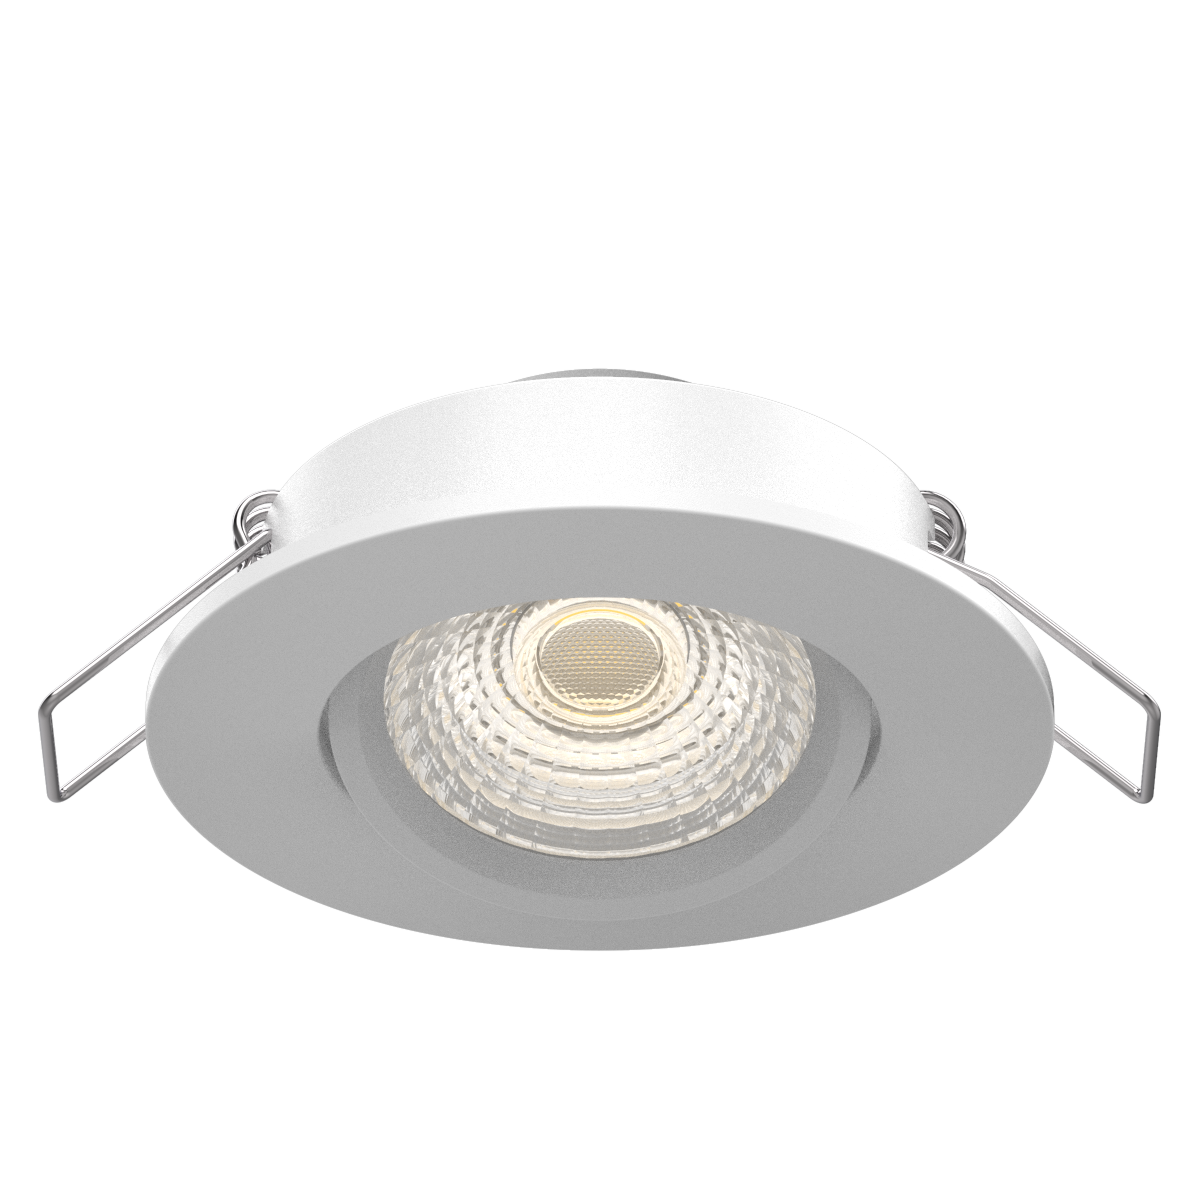 Competitive Price for Led Downlight 200mm - New 7W Slim Dim to warm changeable LED Downlight-Lens Version – Radiant Lighting